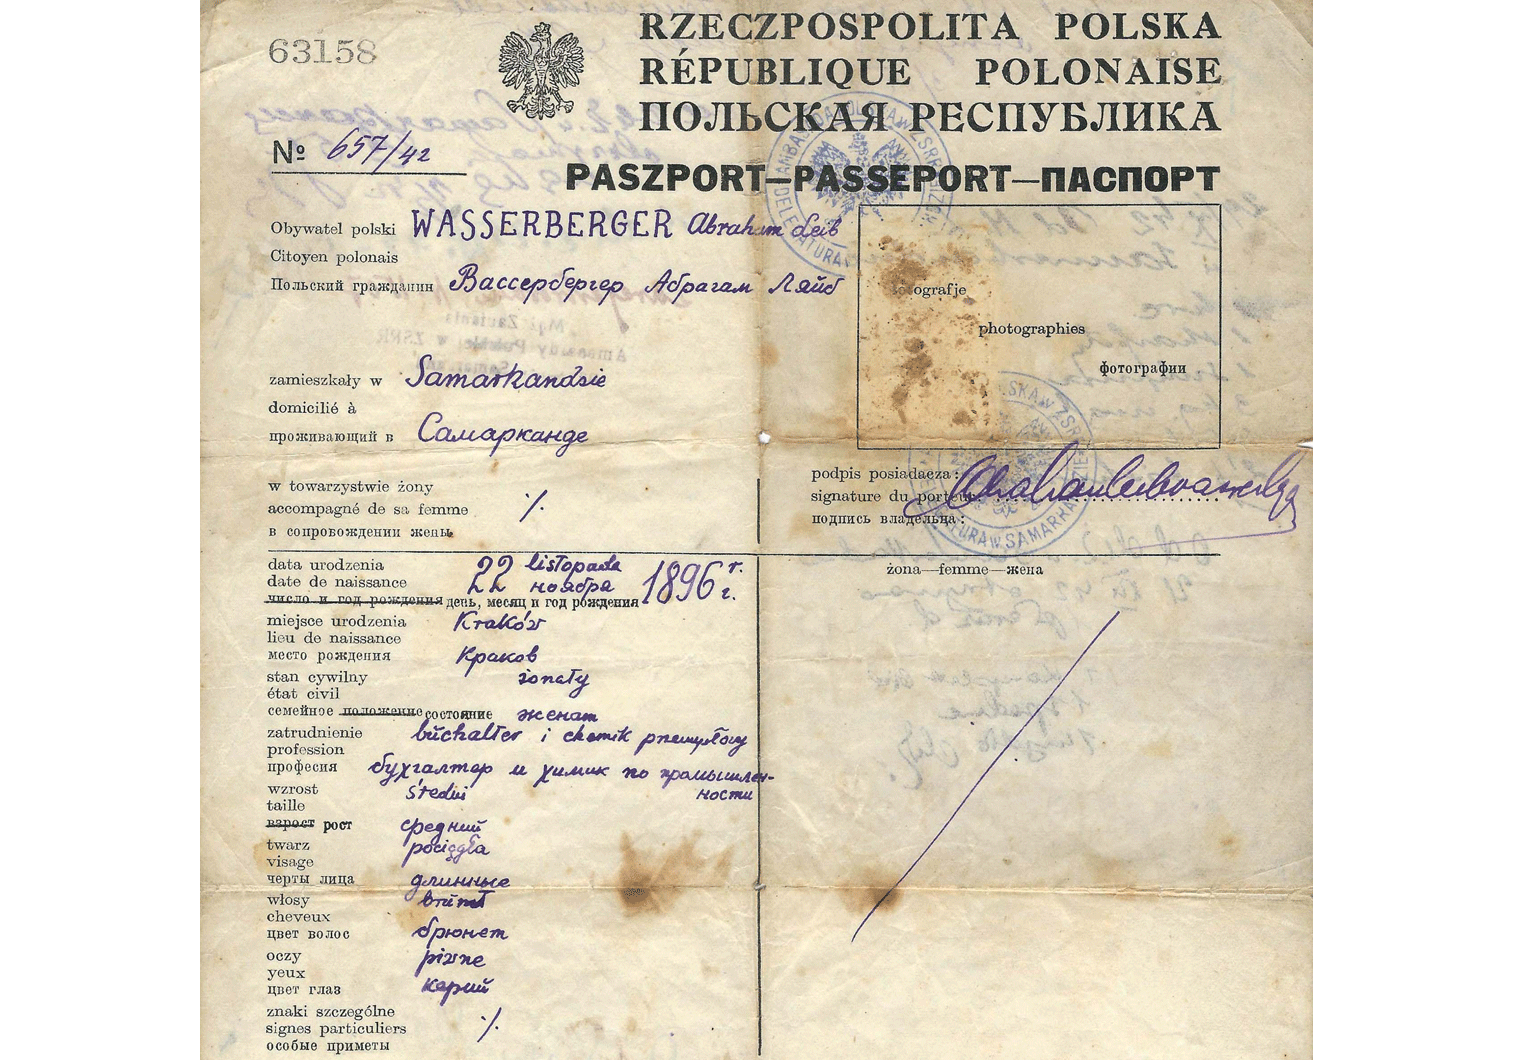 Another NKVD related travel document